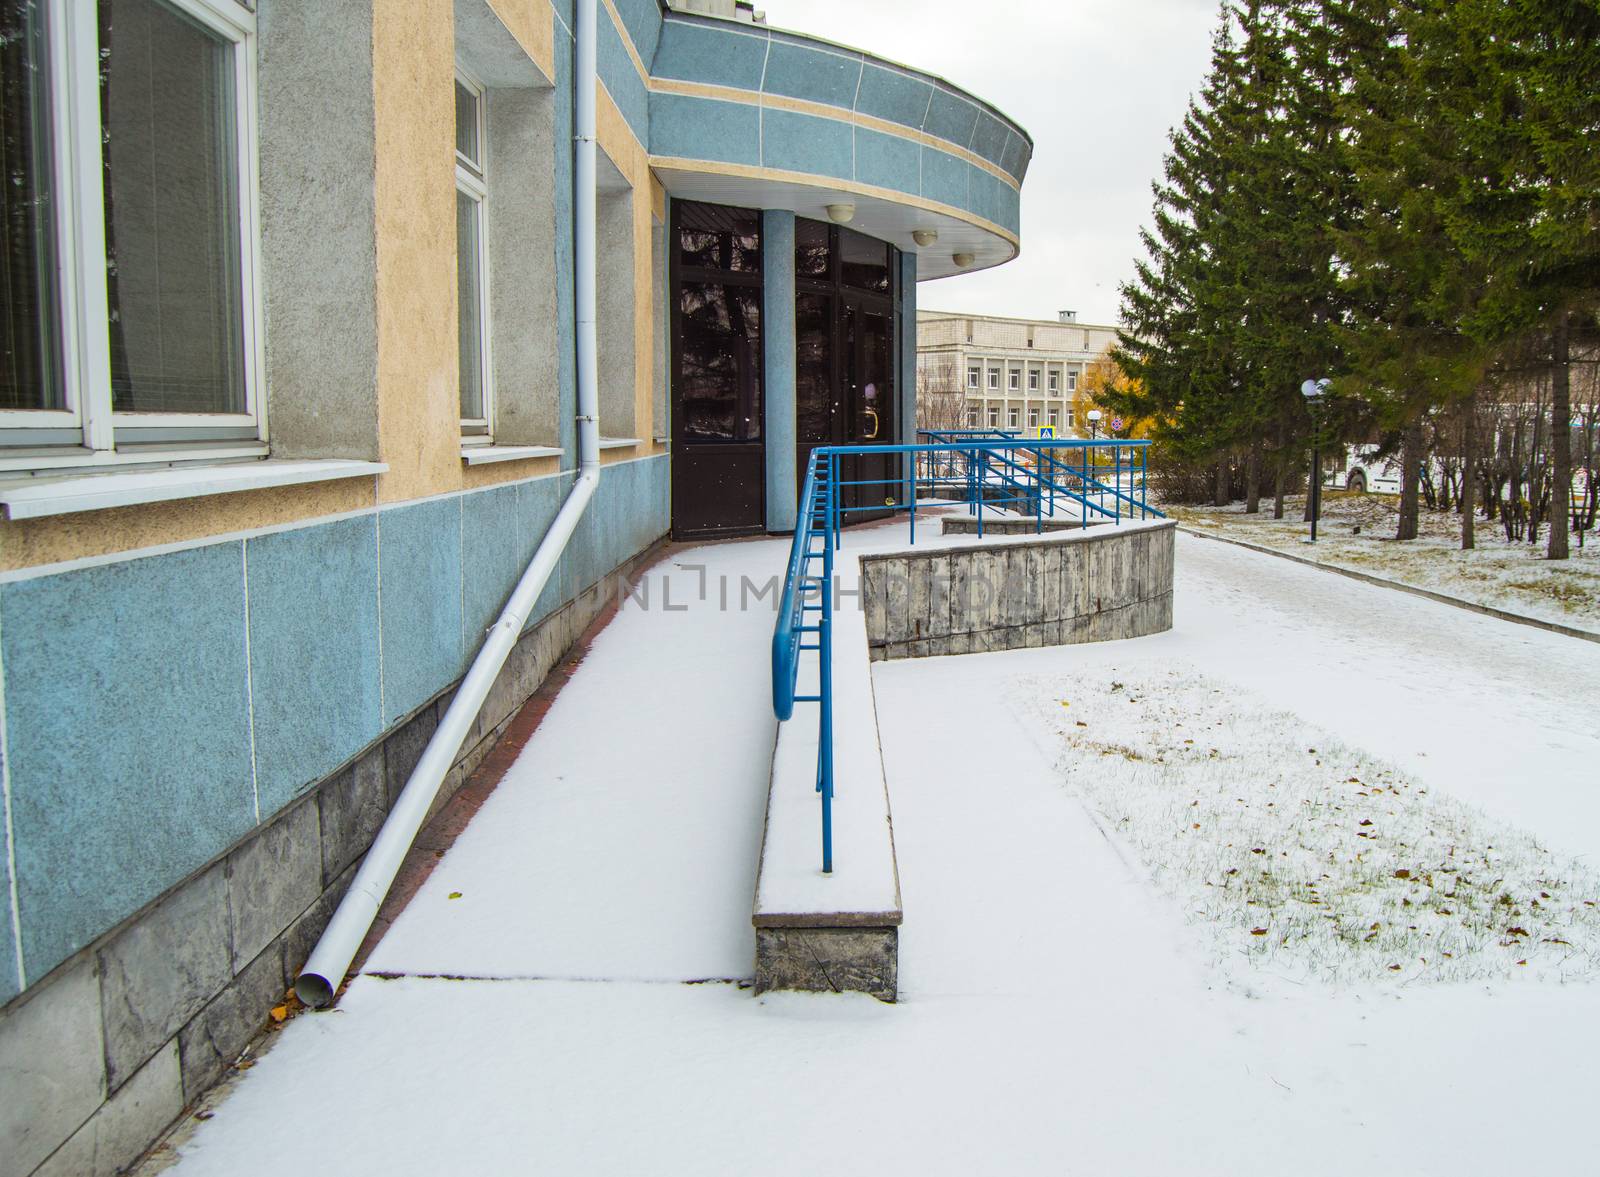 The ramp is covered with the first snow installed for the movement of people with disabilities at any time of the year by claire_lucia